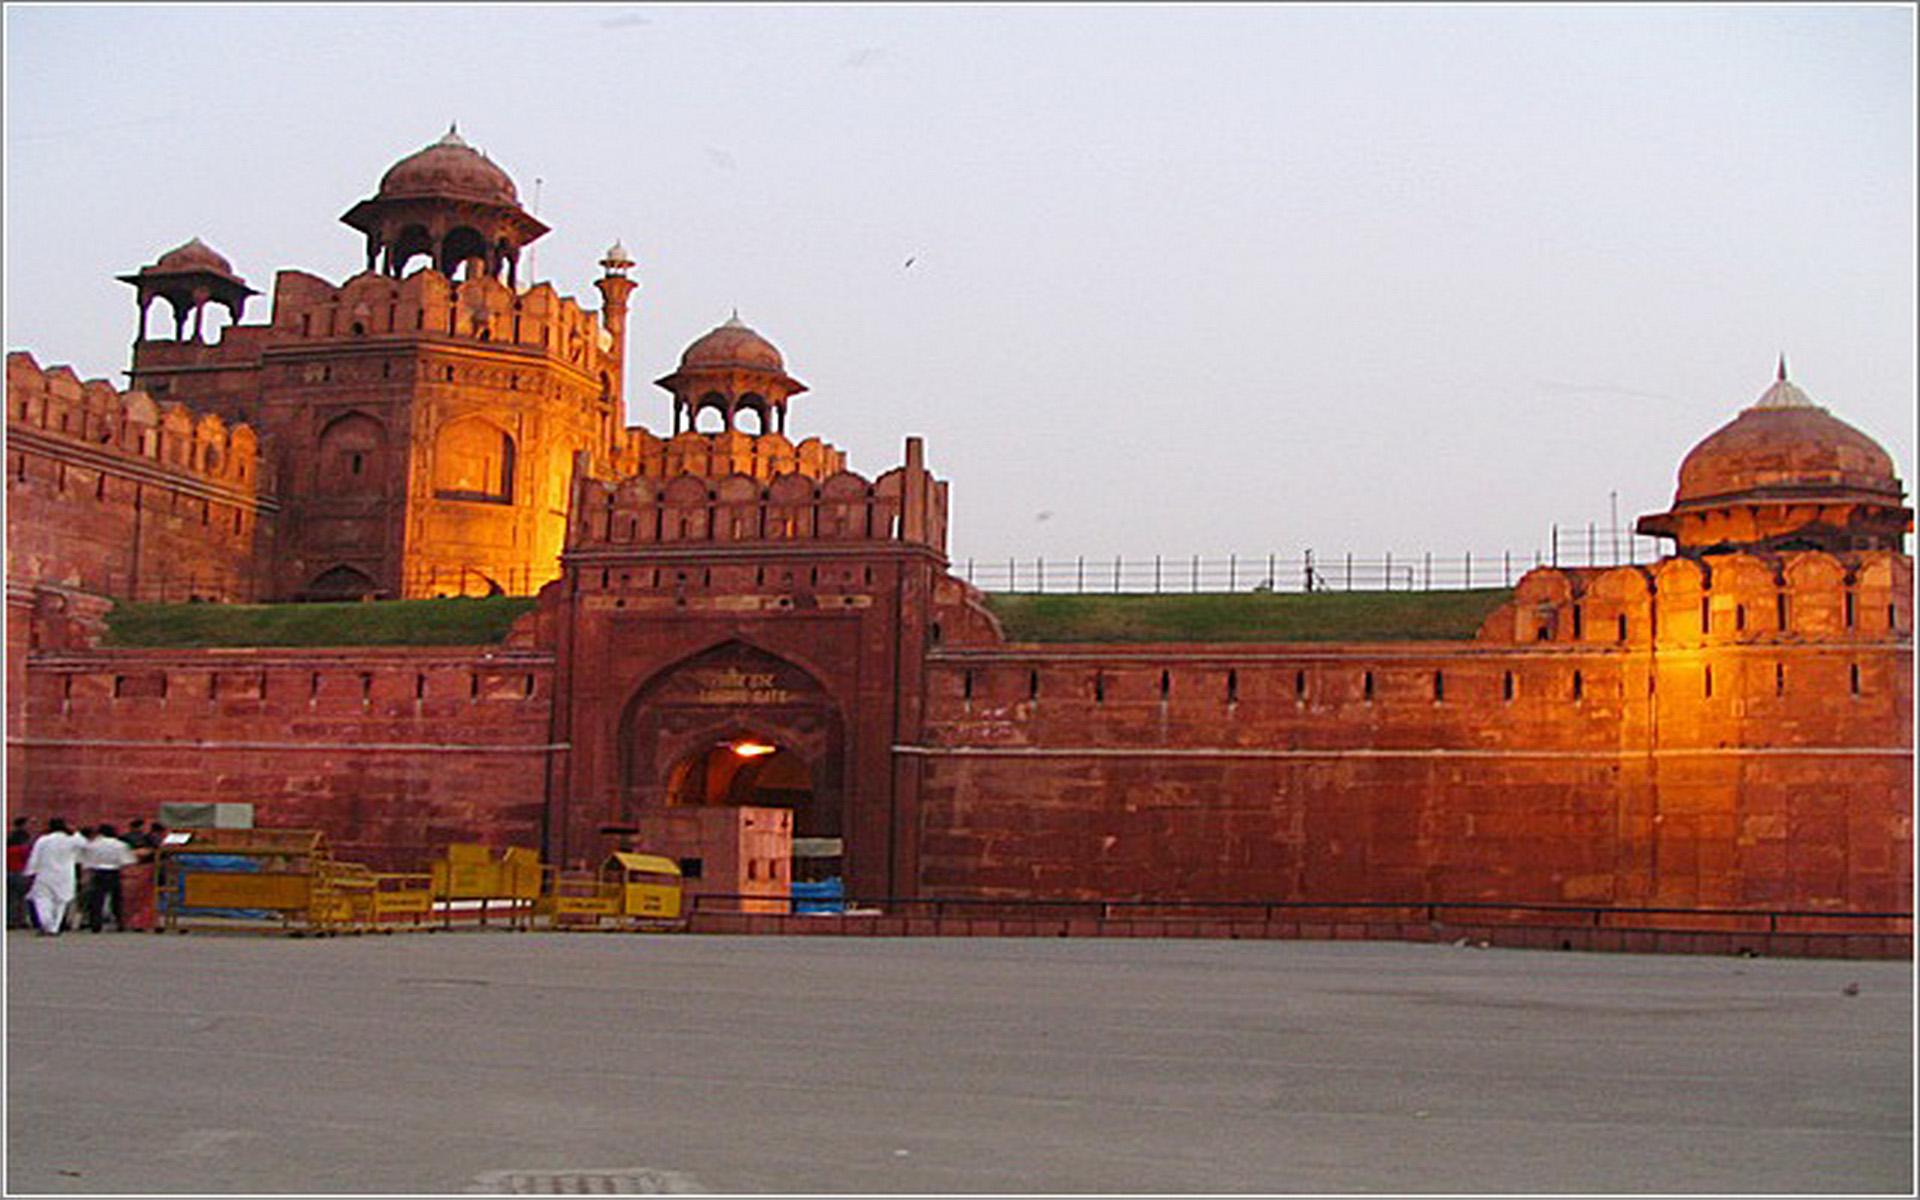 Agra Fort India Wallpaper. HD Wallpaper Agra Fort India